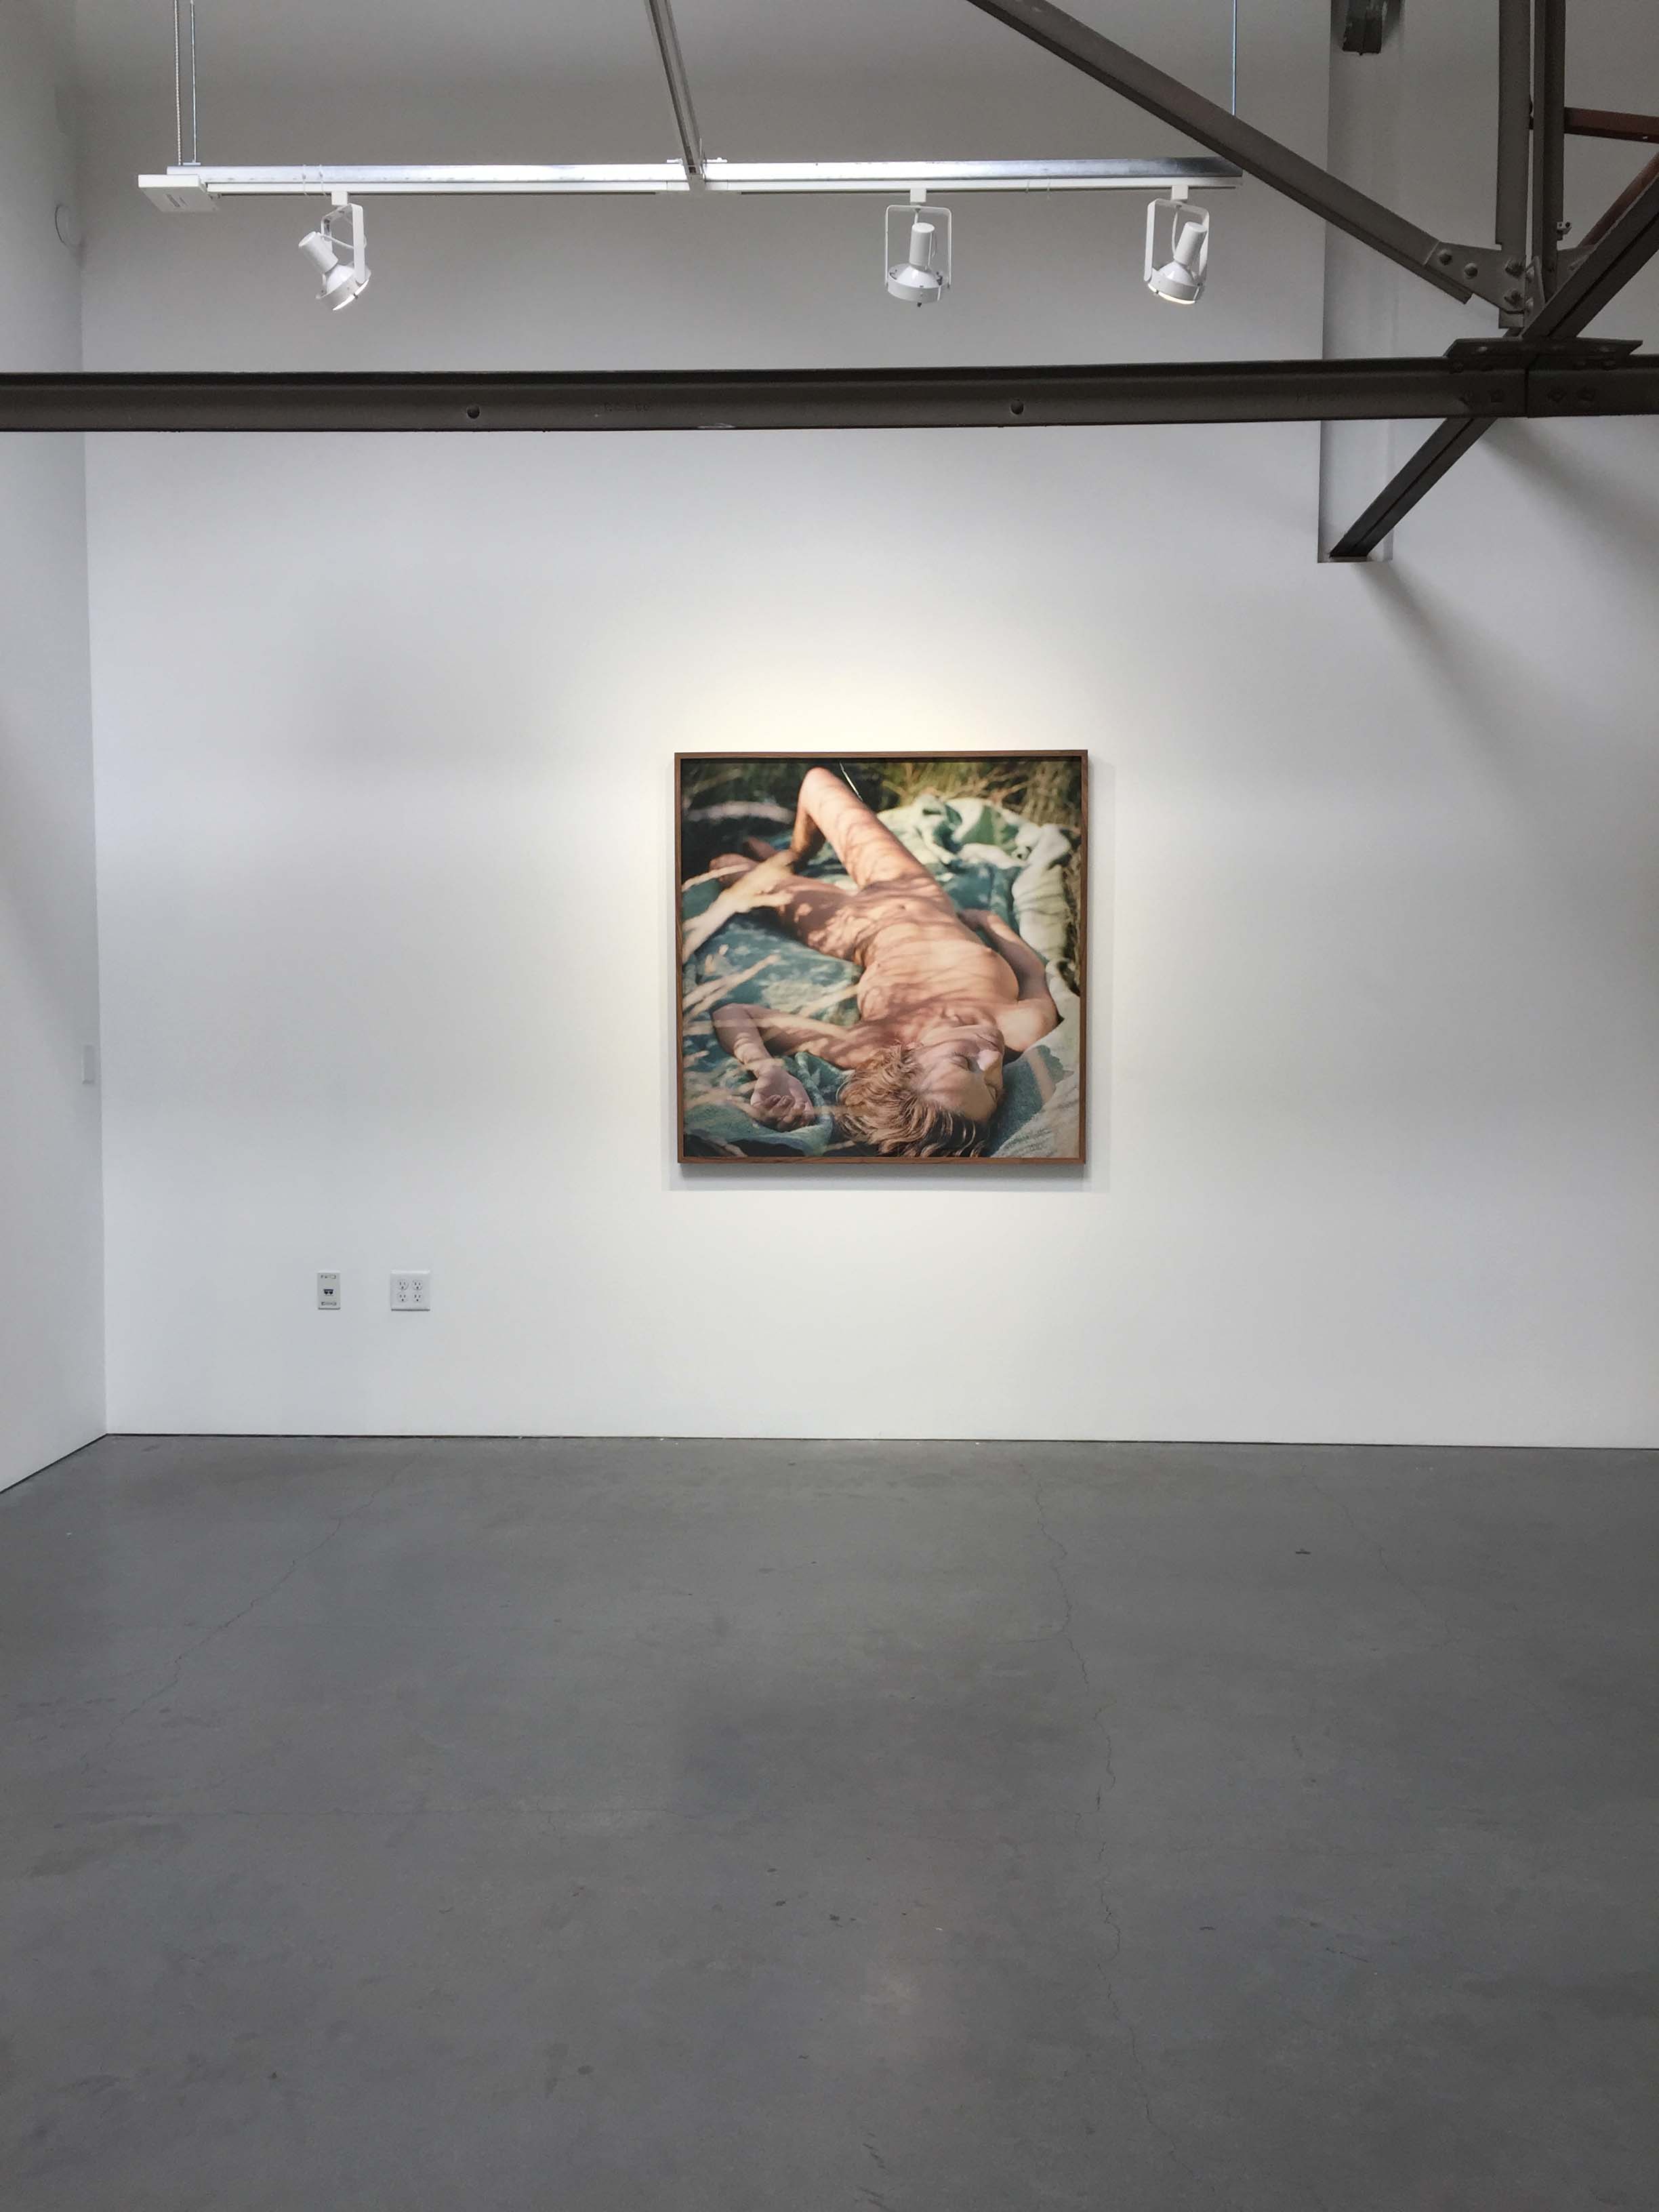  Installation view Mona Kuhn: The First Chapter ,  May 4 - June 10, 2017 at EUQINOM Gallery 